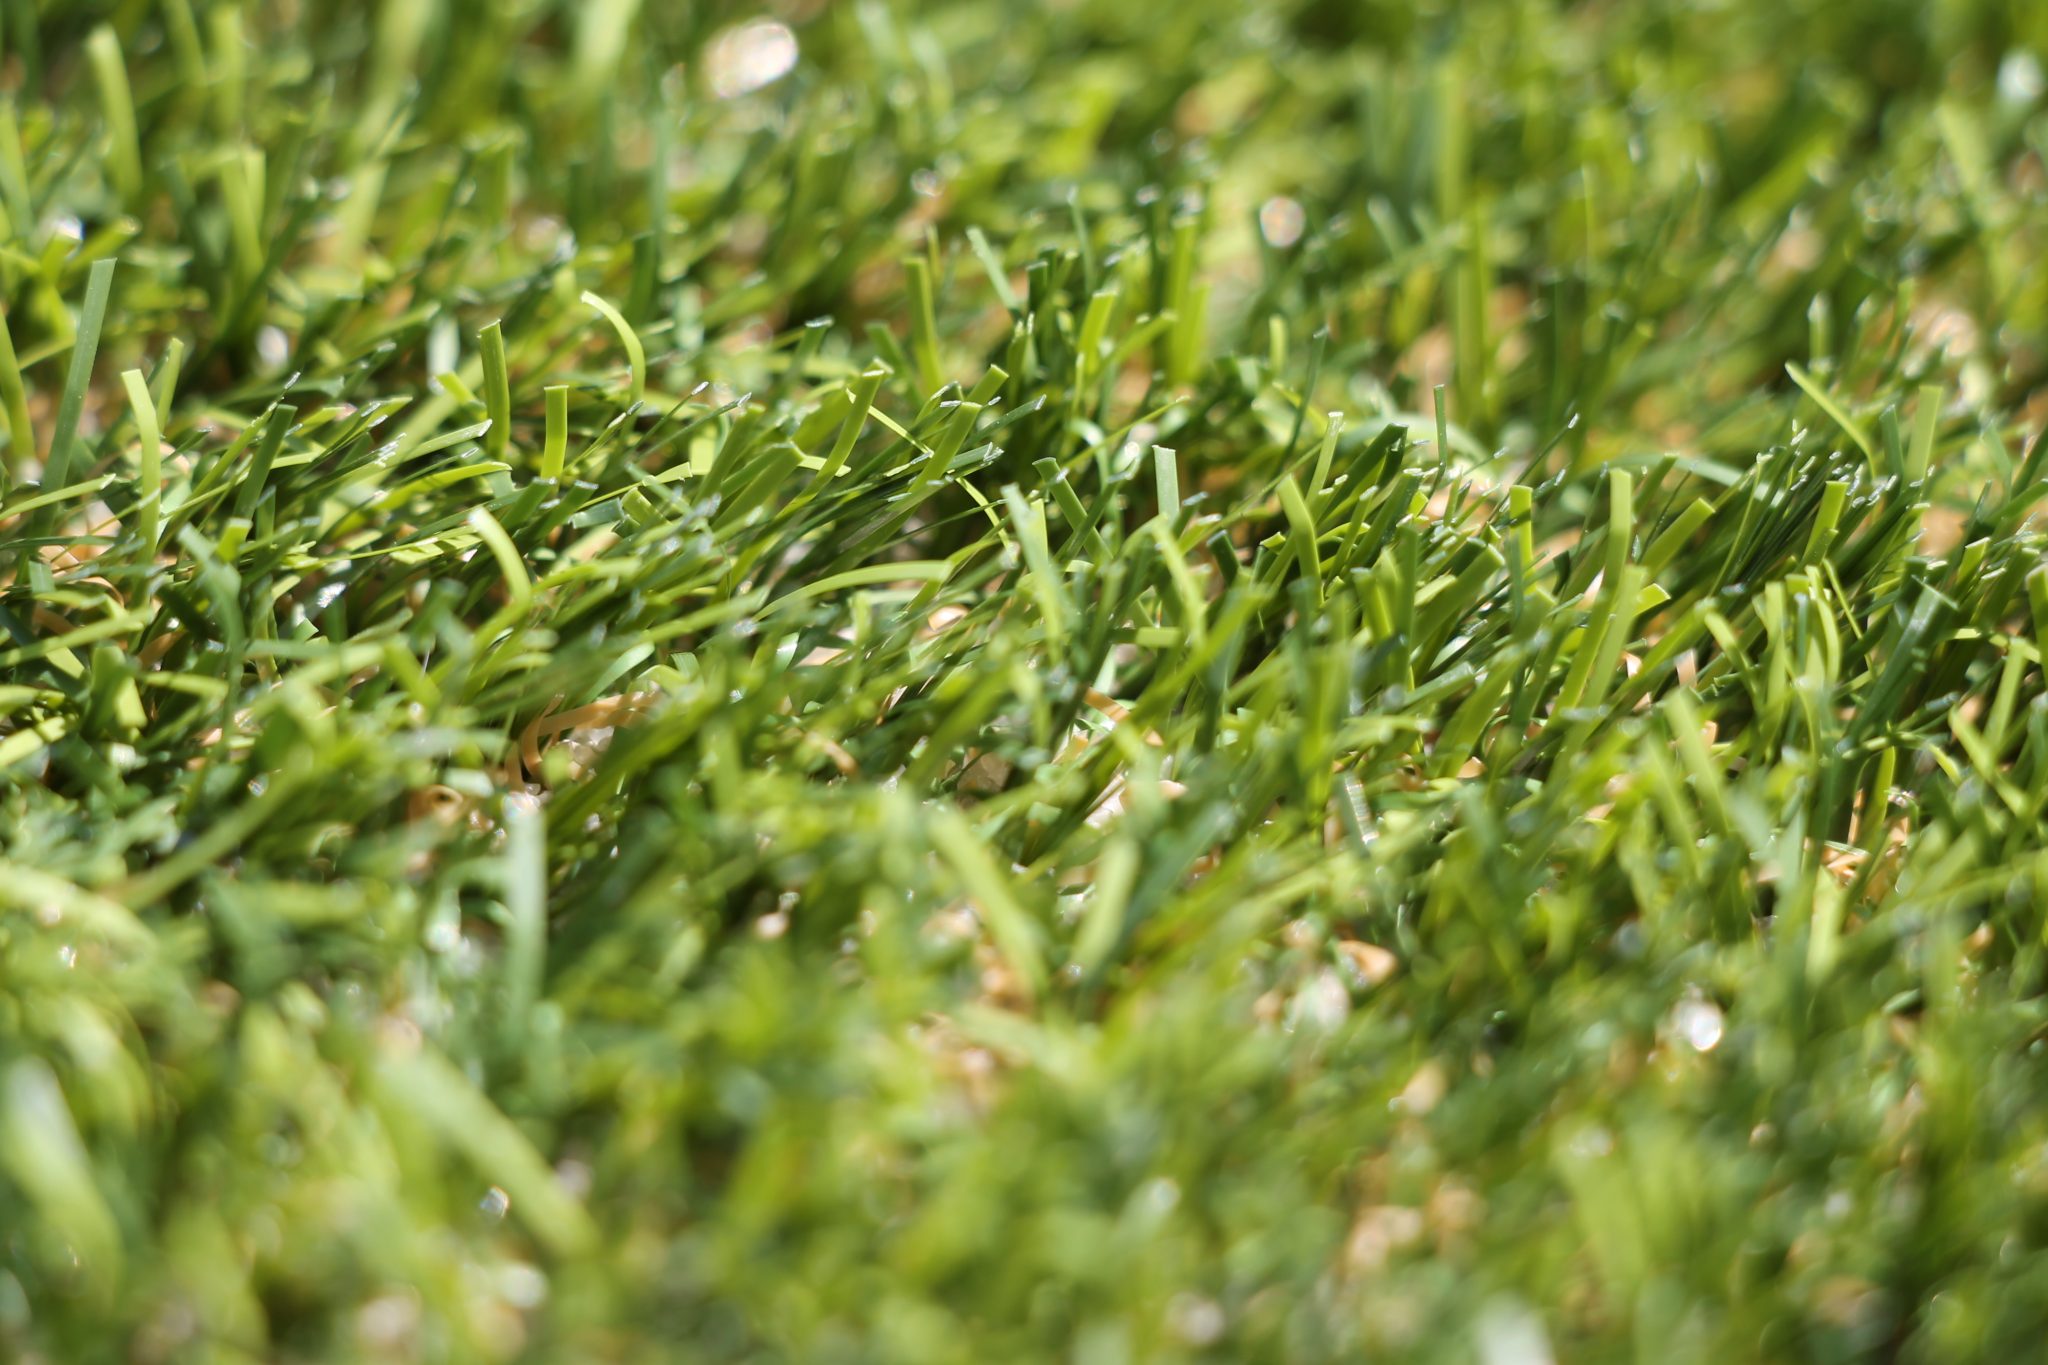 Close-up of astroturf